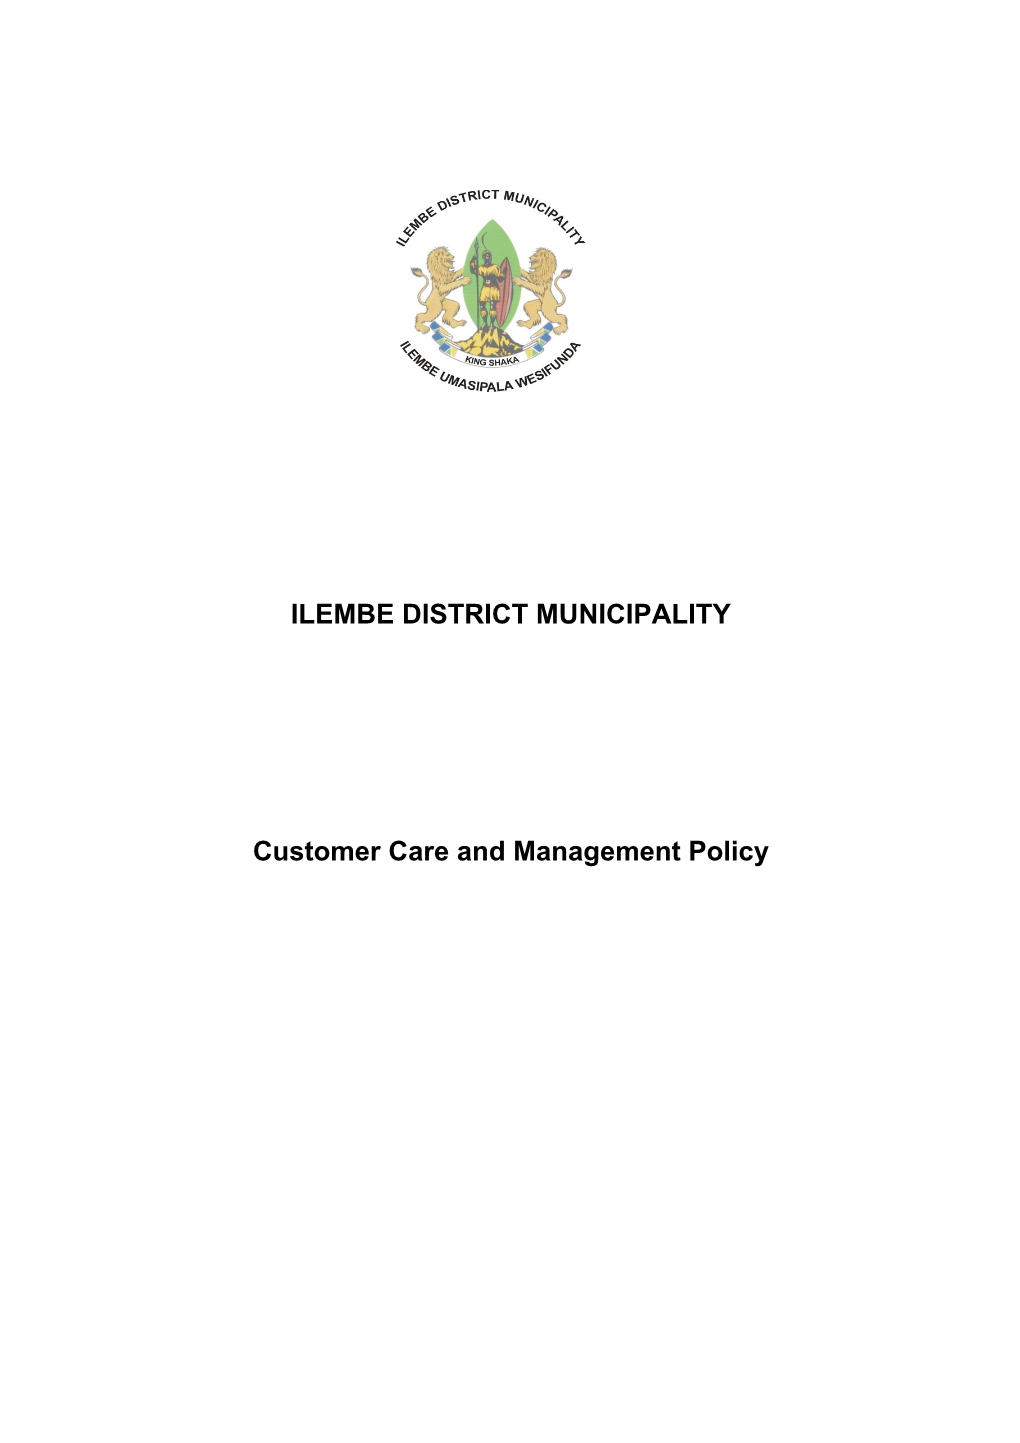 Customer Care and Management Policy